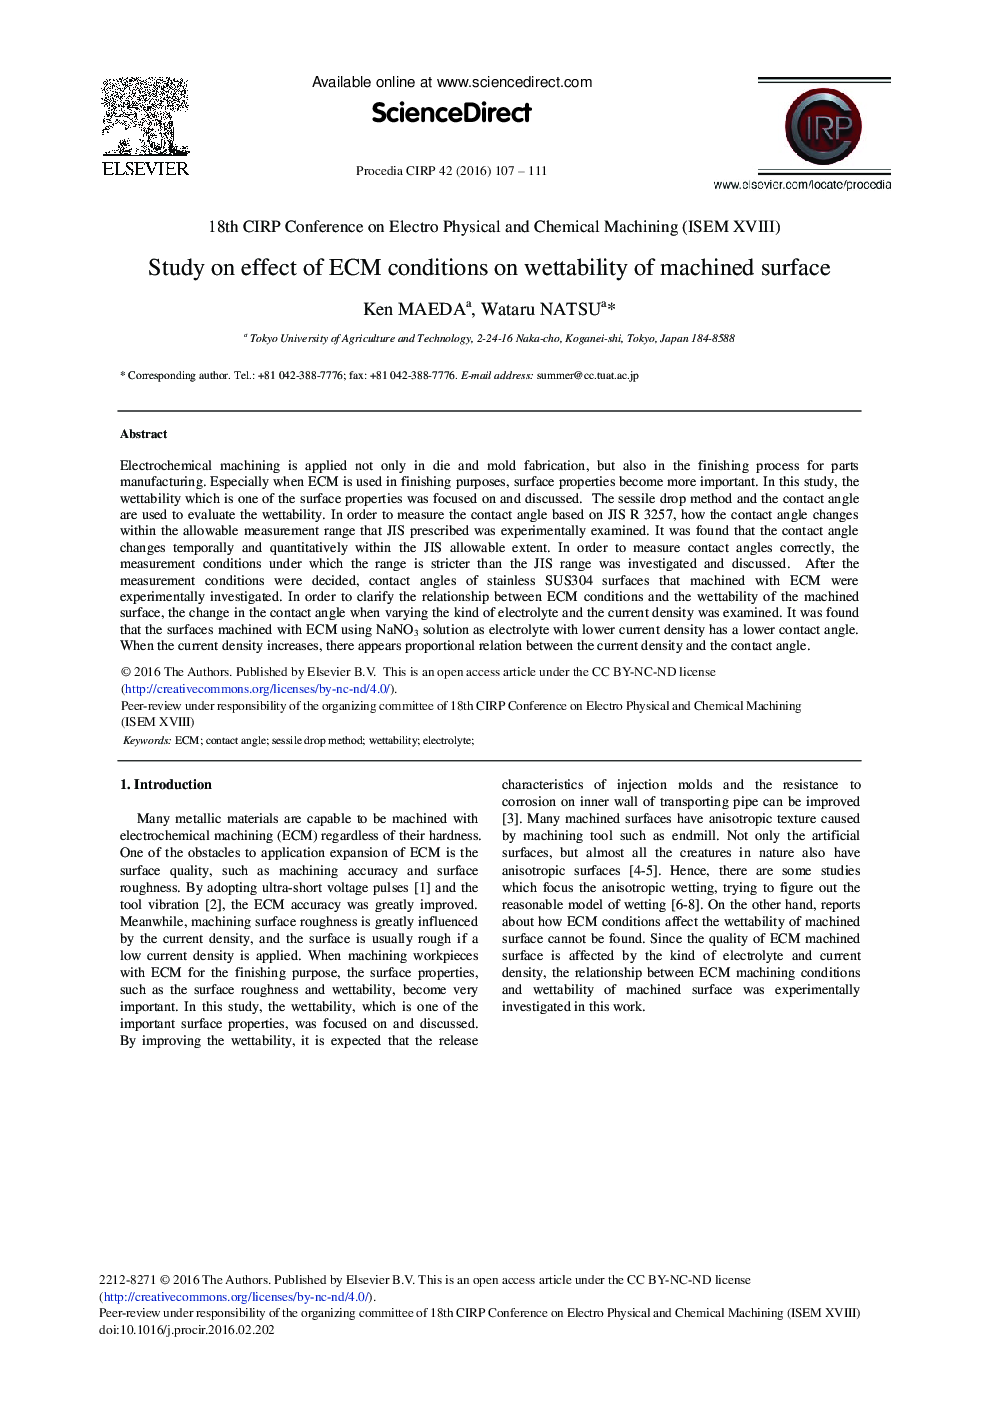 Study on Effect of ECM Conditions on Wettability of Machined Surface 